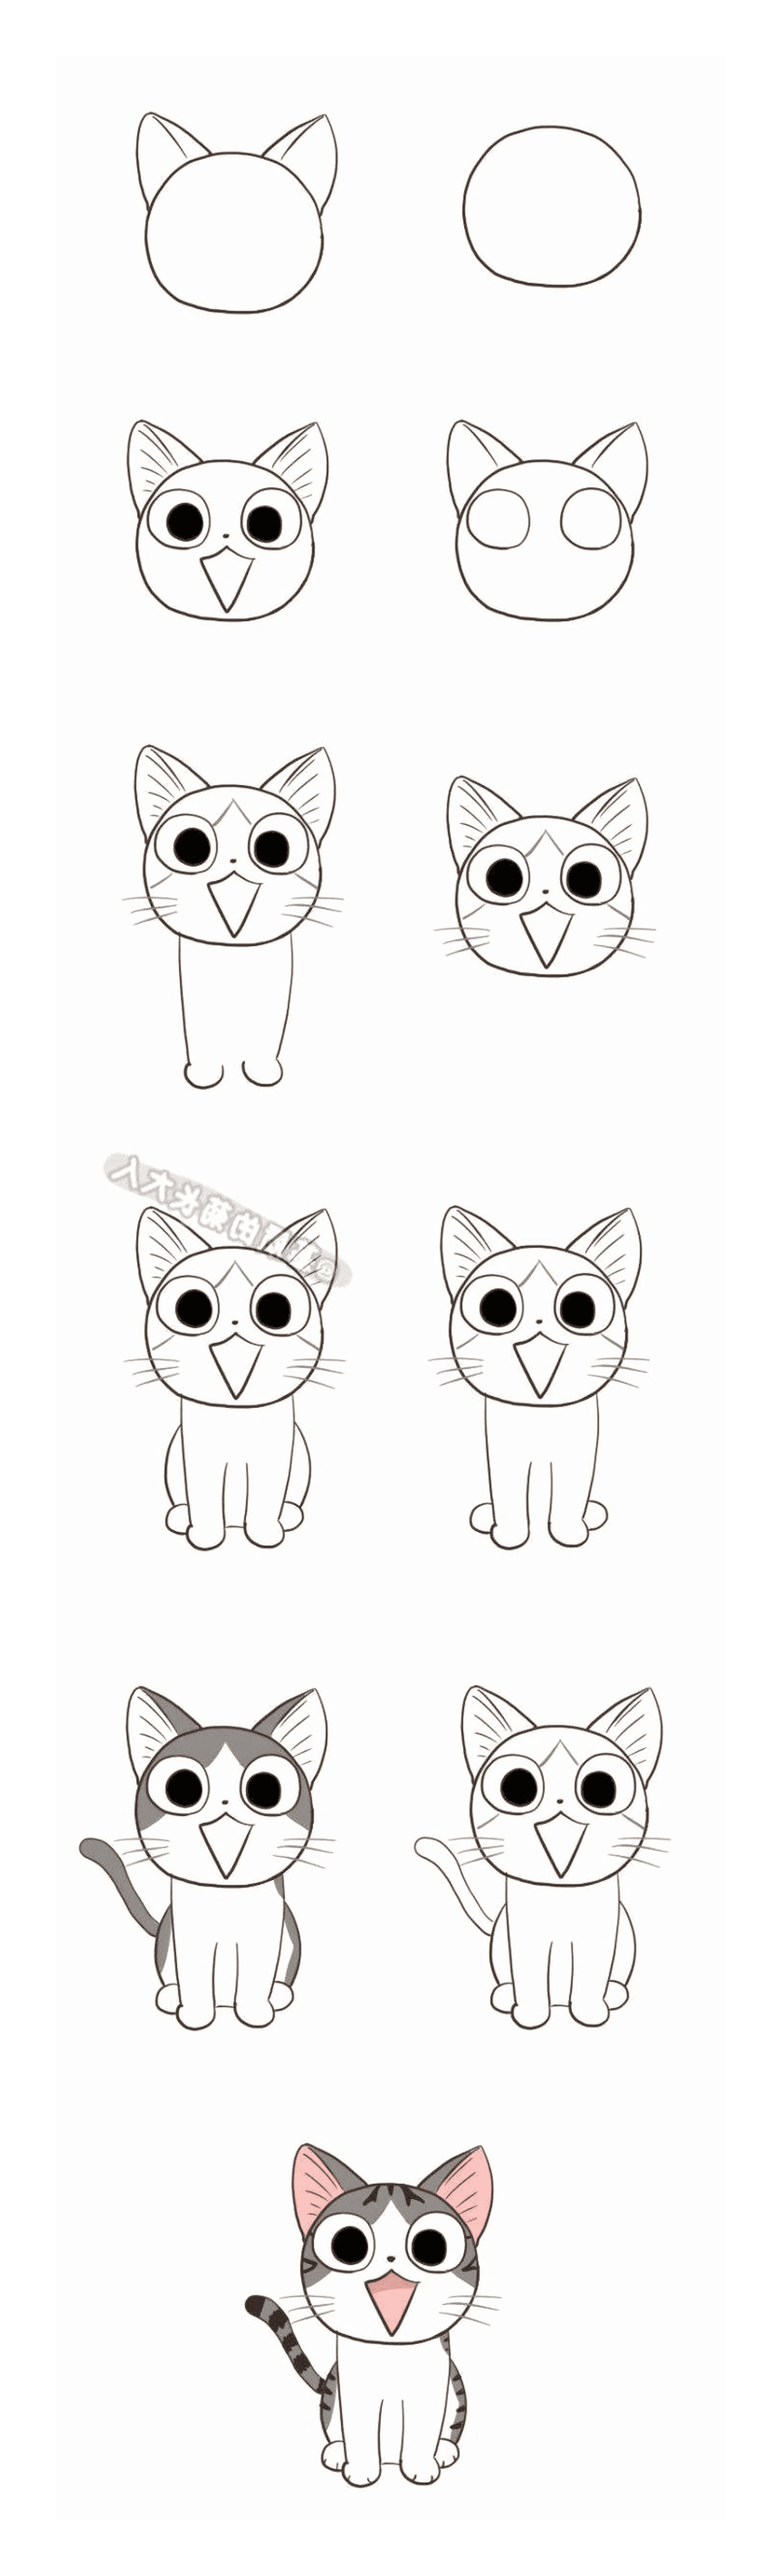  How to draw a kawaii cat 